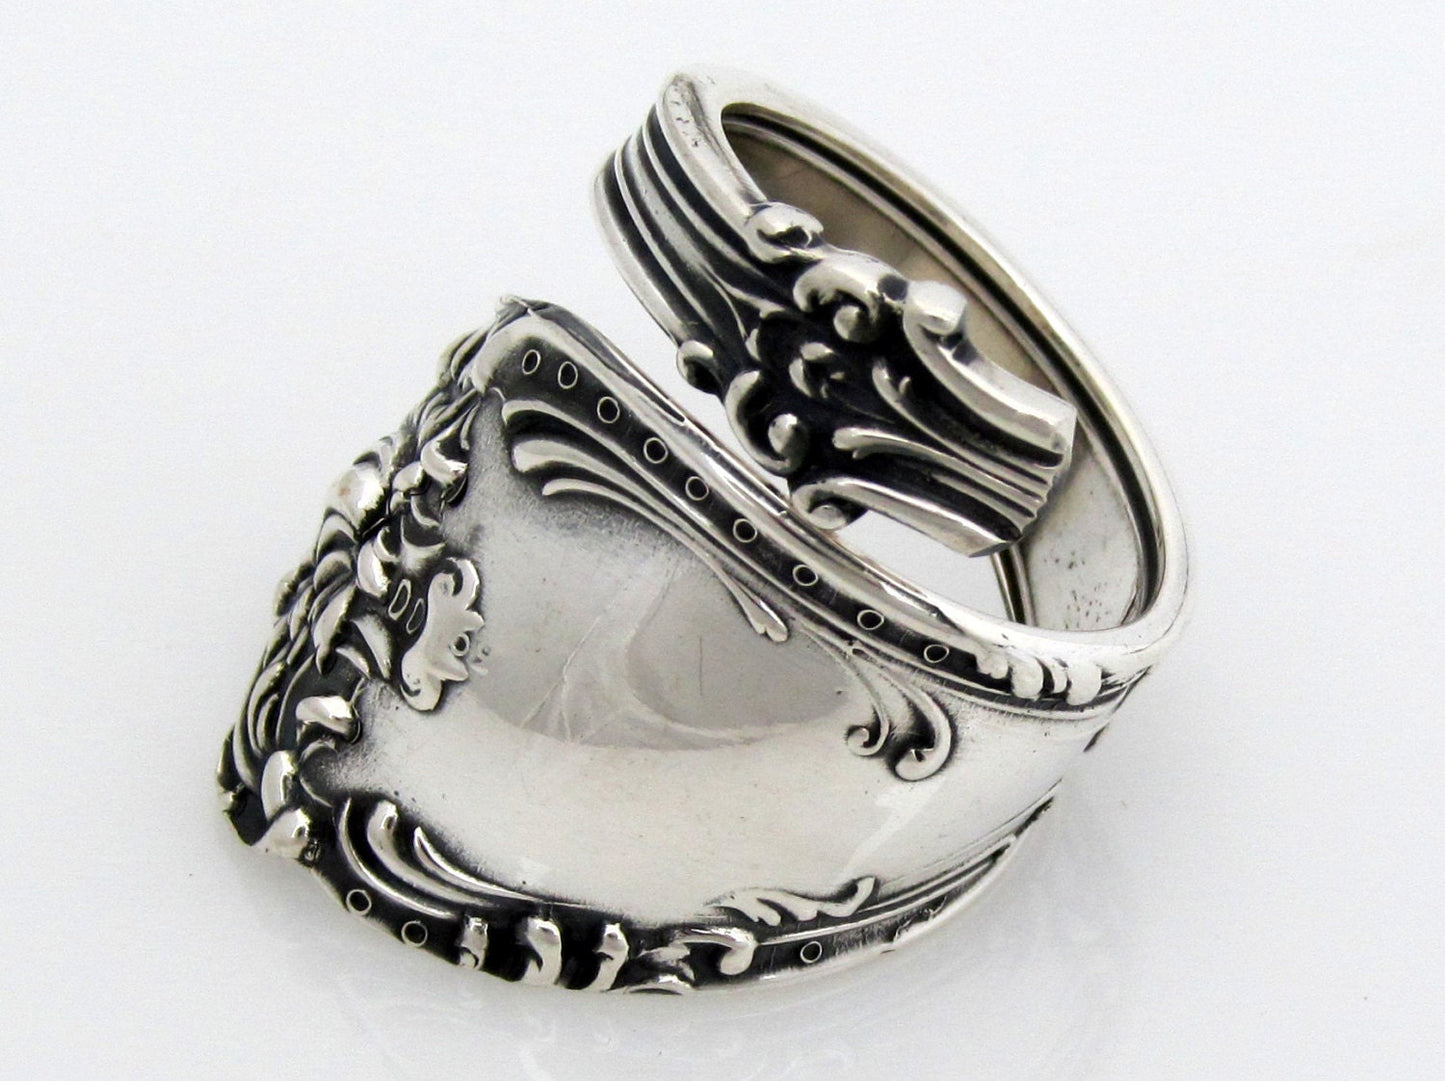 Altair Wrapped Sterling Silver Spoon Ring by Watson 1904 Art Nouveau